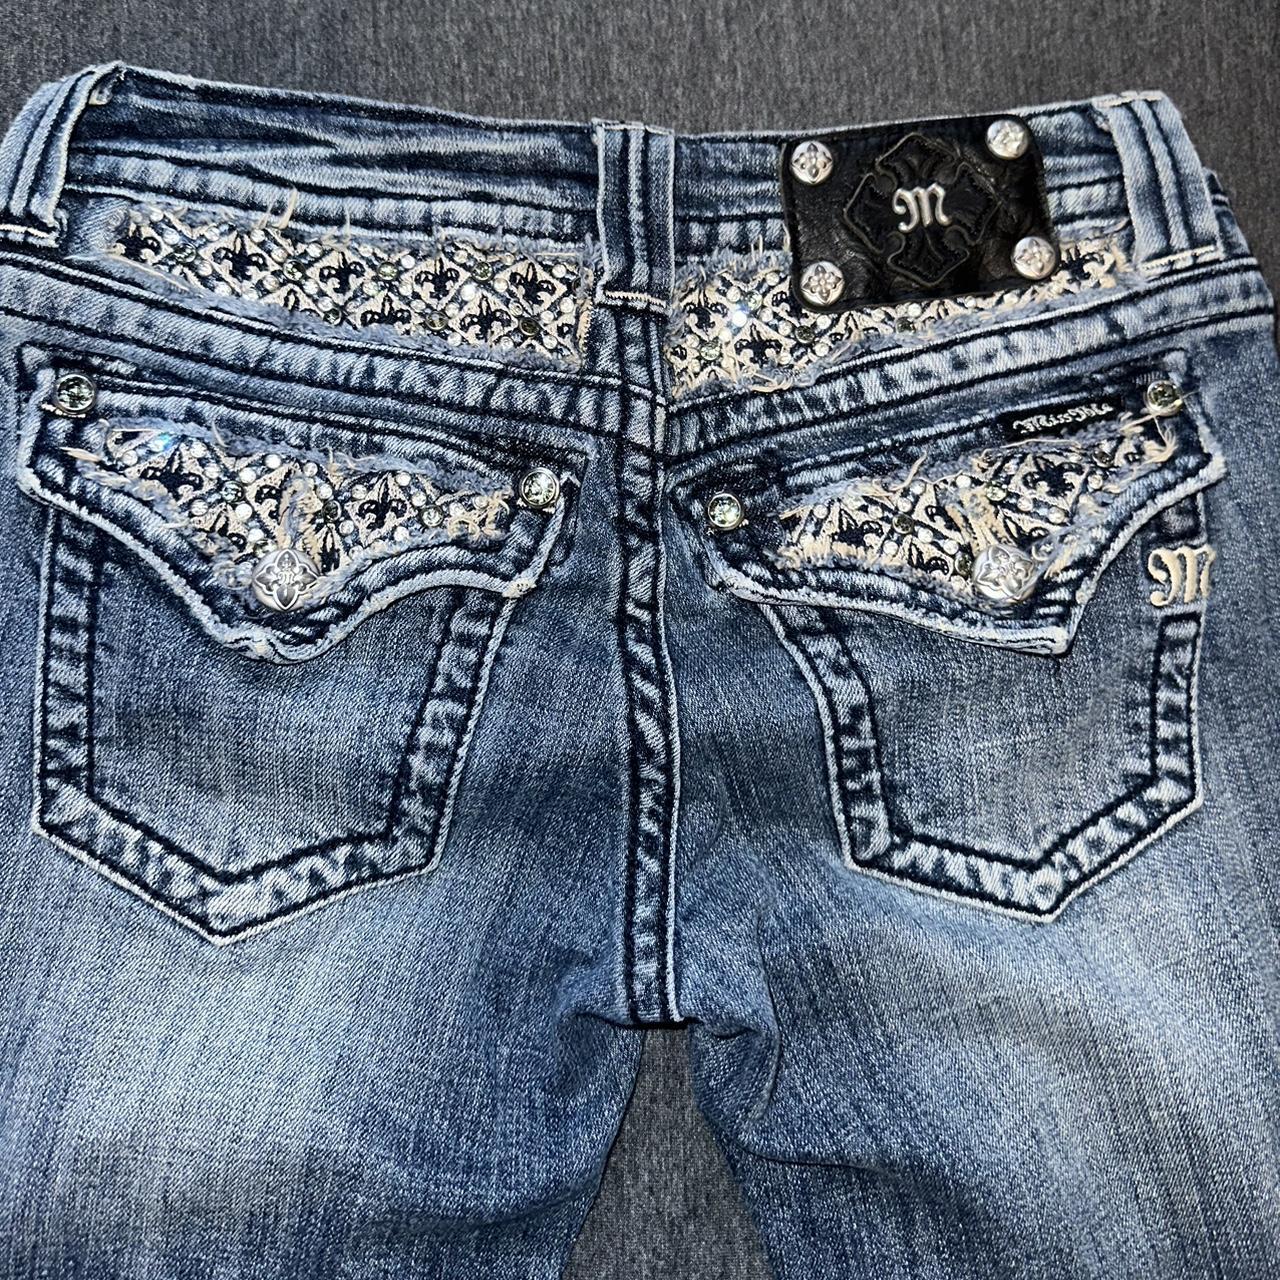 Bedazzled miss me jeans Size 27 Inseam 30 Straight... - Depop